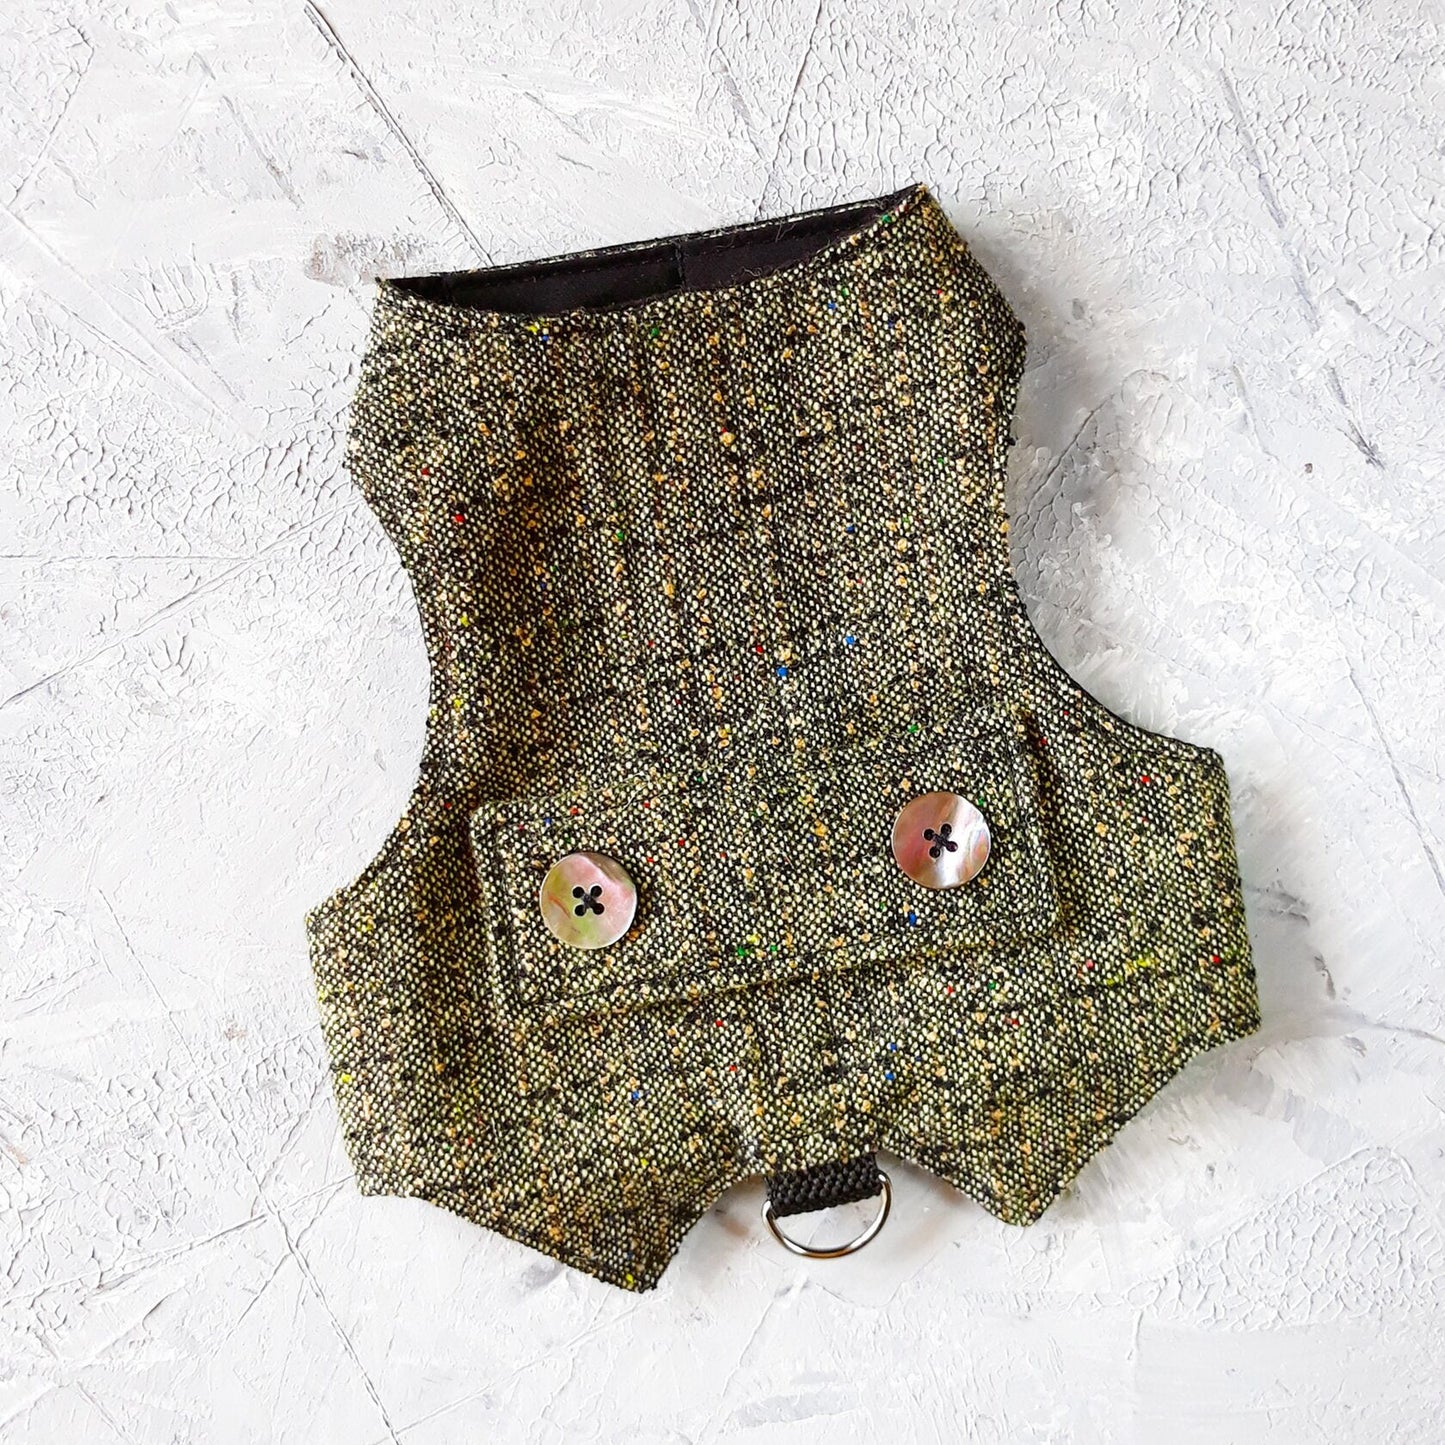 Difficult to escape elegant tweed cat harness with pearl buttons